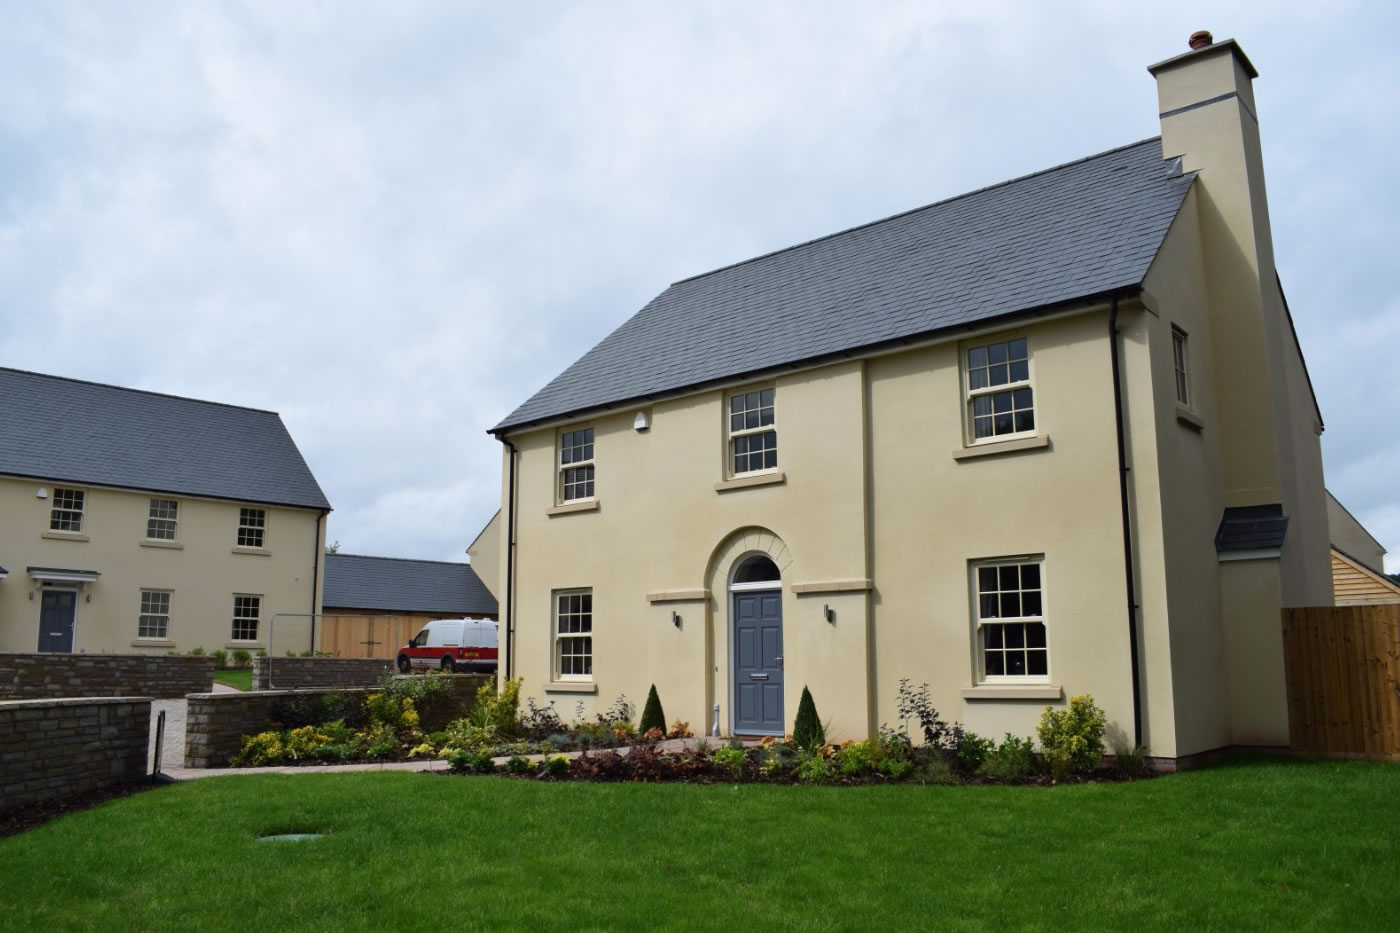 Edenstone Homes, Trellech, Monmouthshire, South Wales